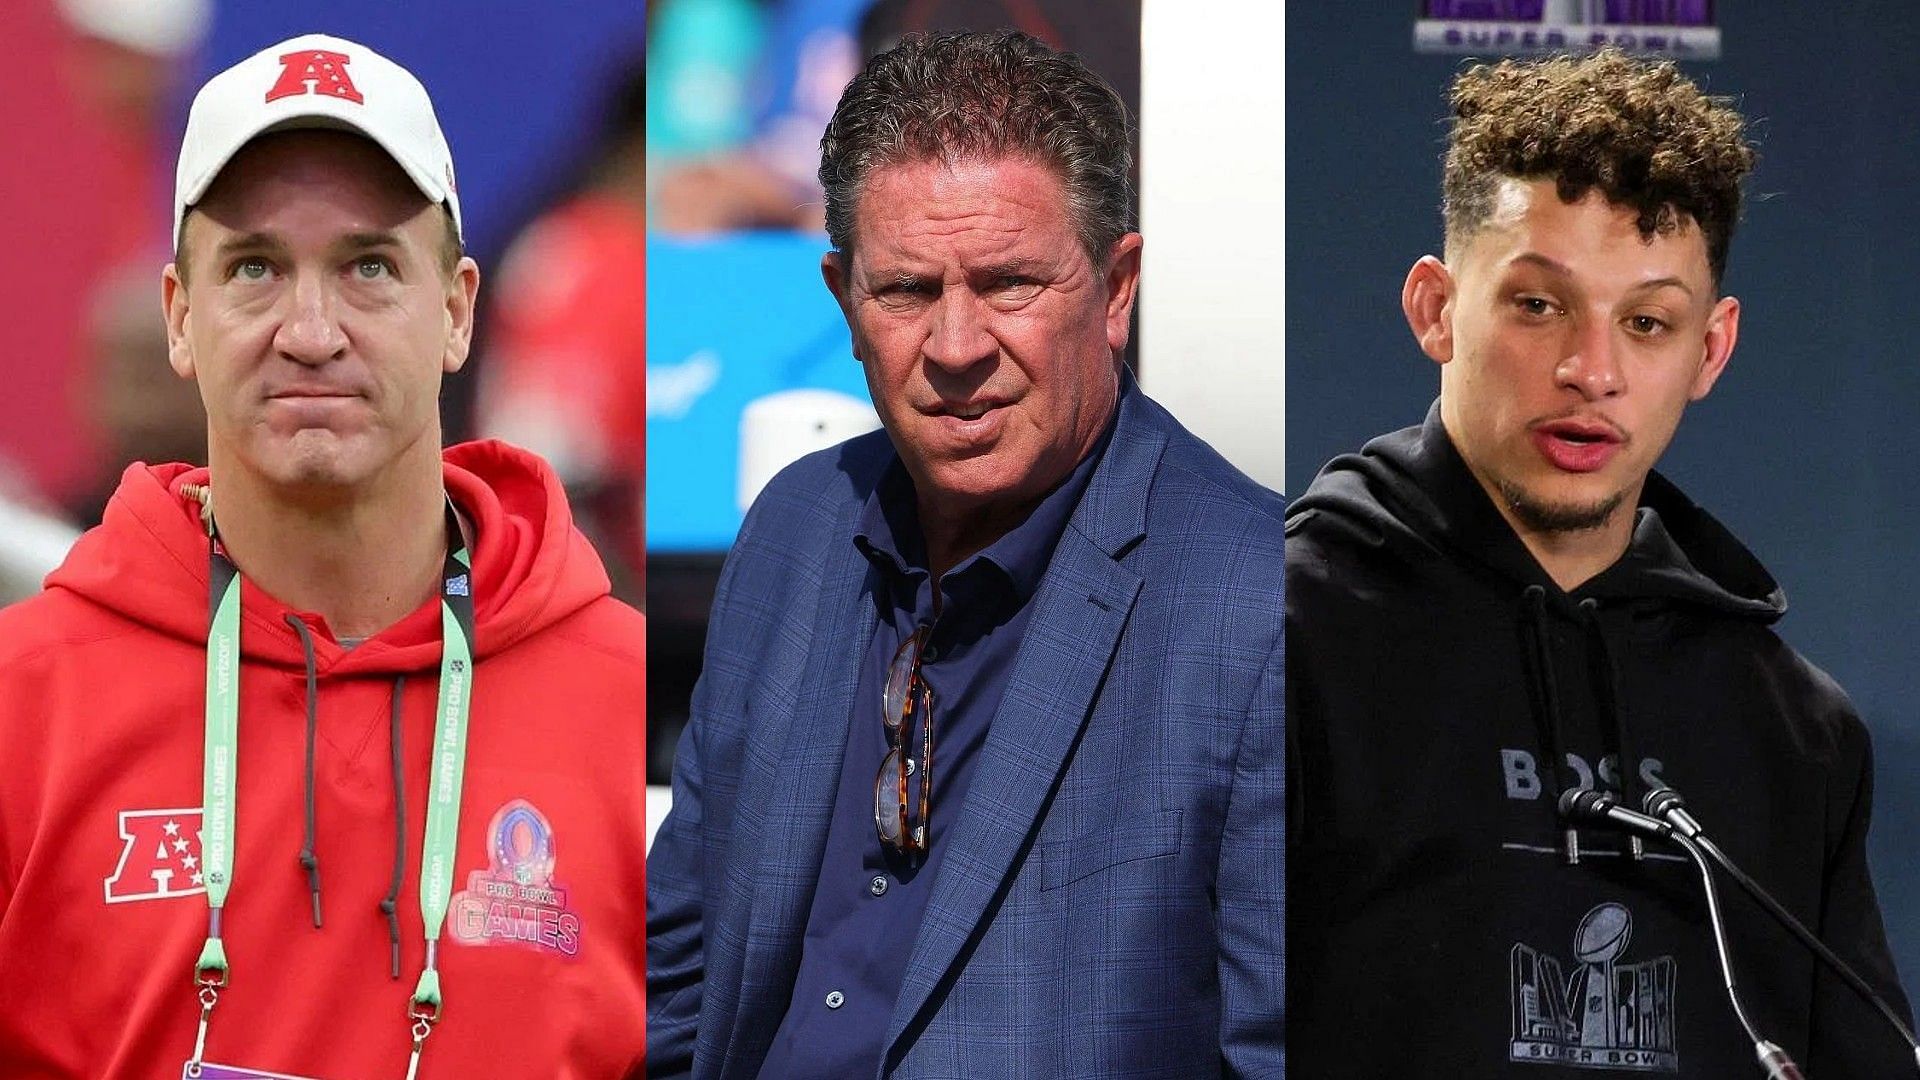 Dan Marino leaves Peyton Manning off Mount Rushmore of NFL QBs feat. Patrick Mahomes